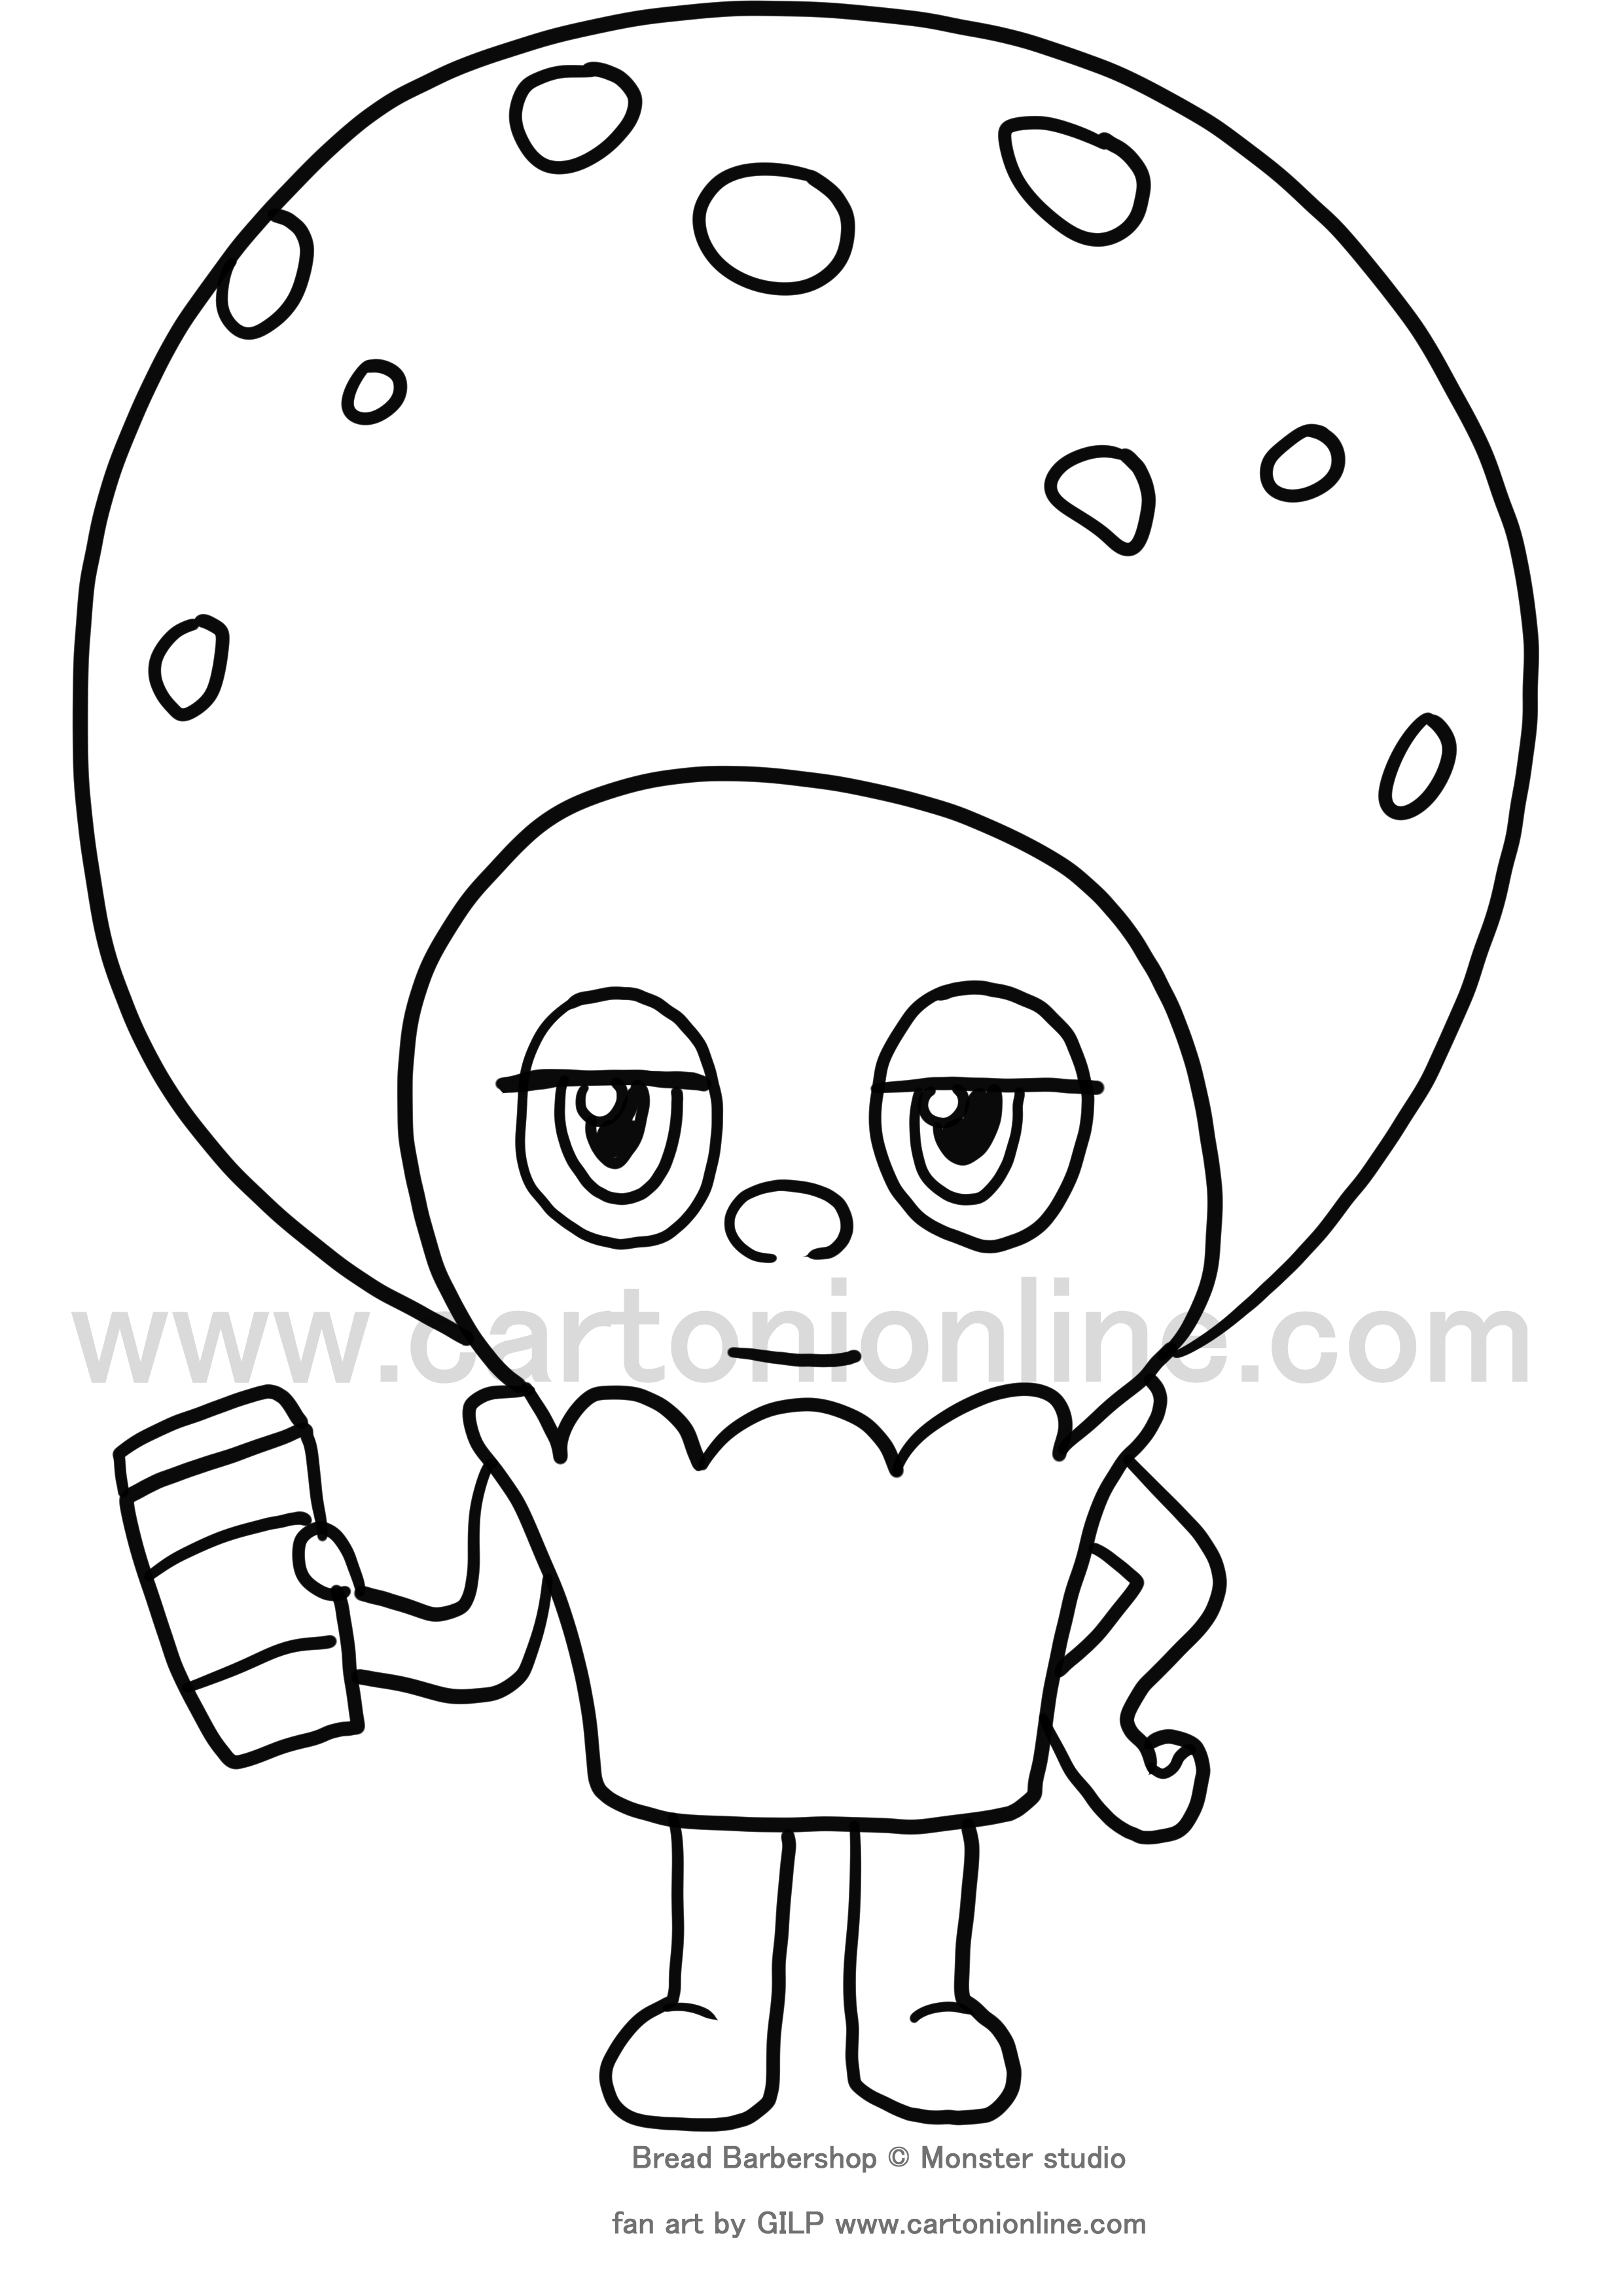 Choco from Bread Barbershop coloring page